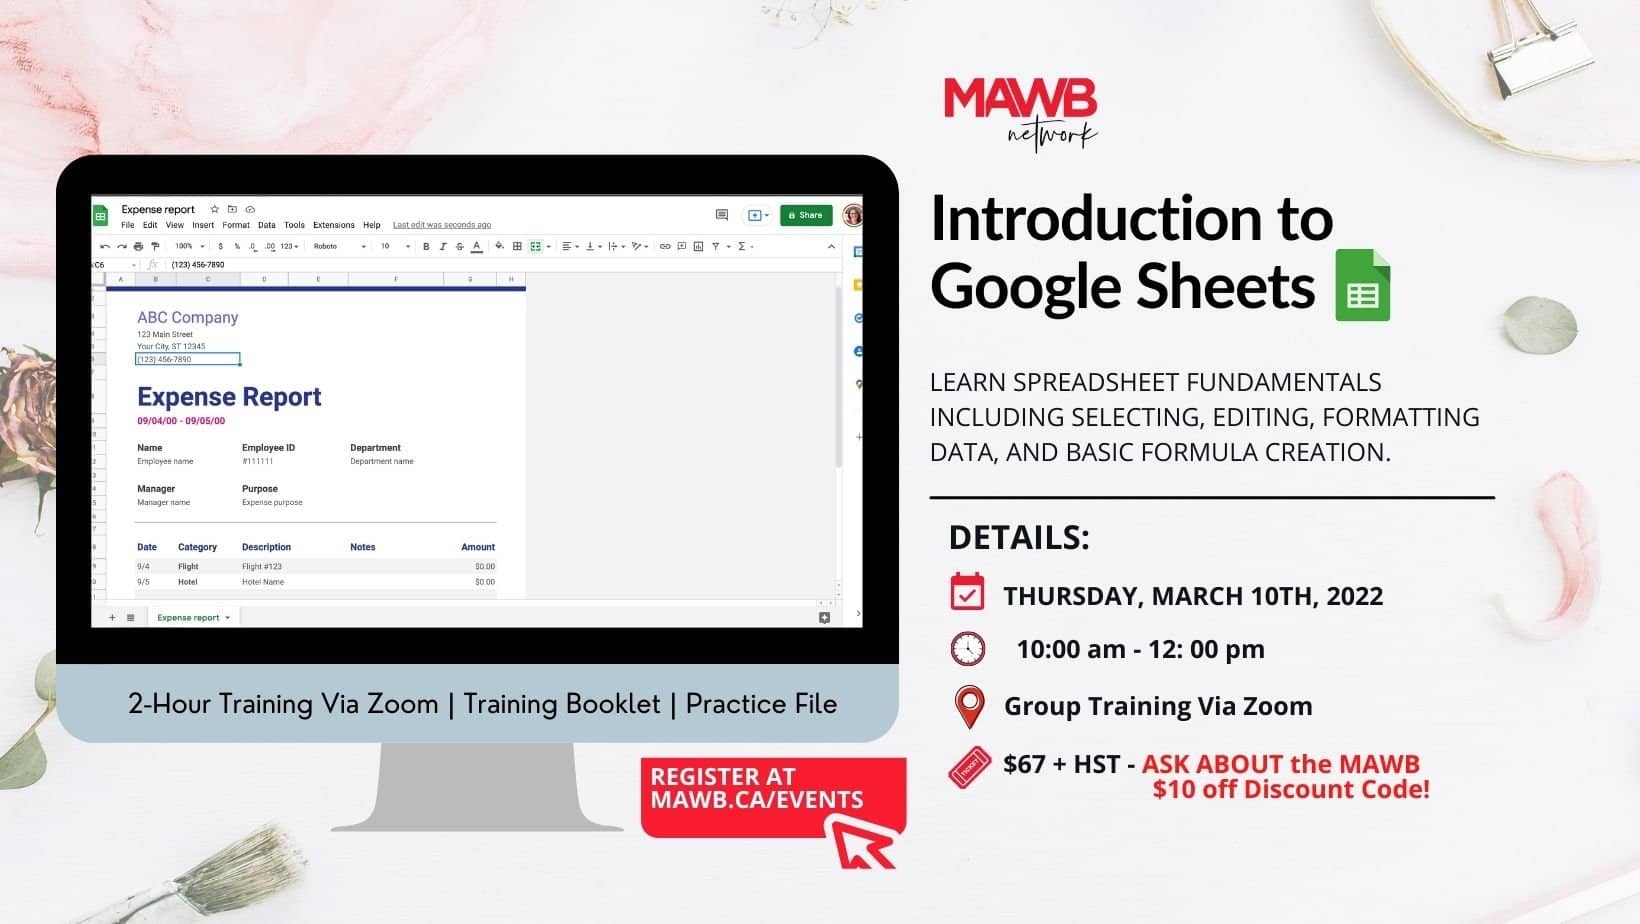 Introduction to Google Sheets - Training